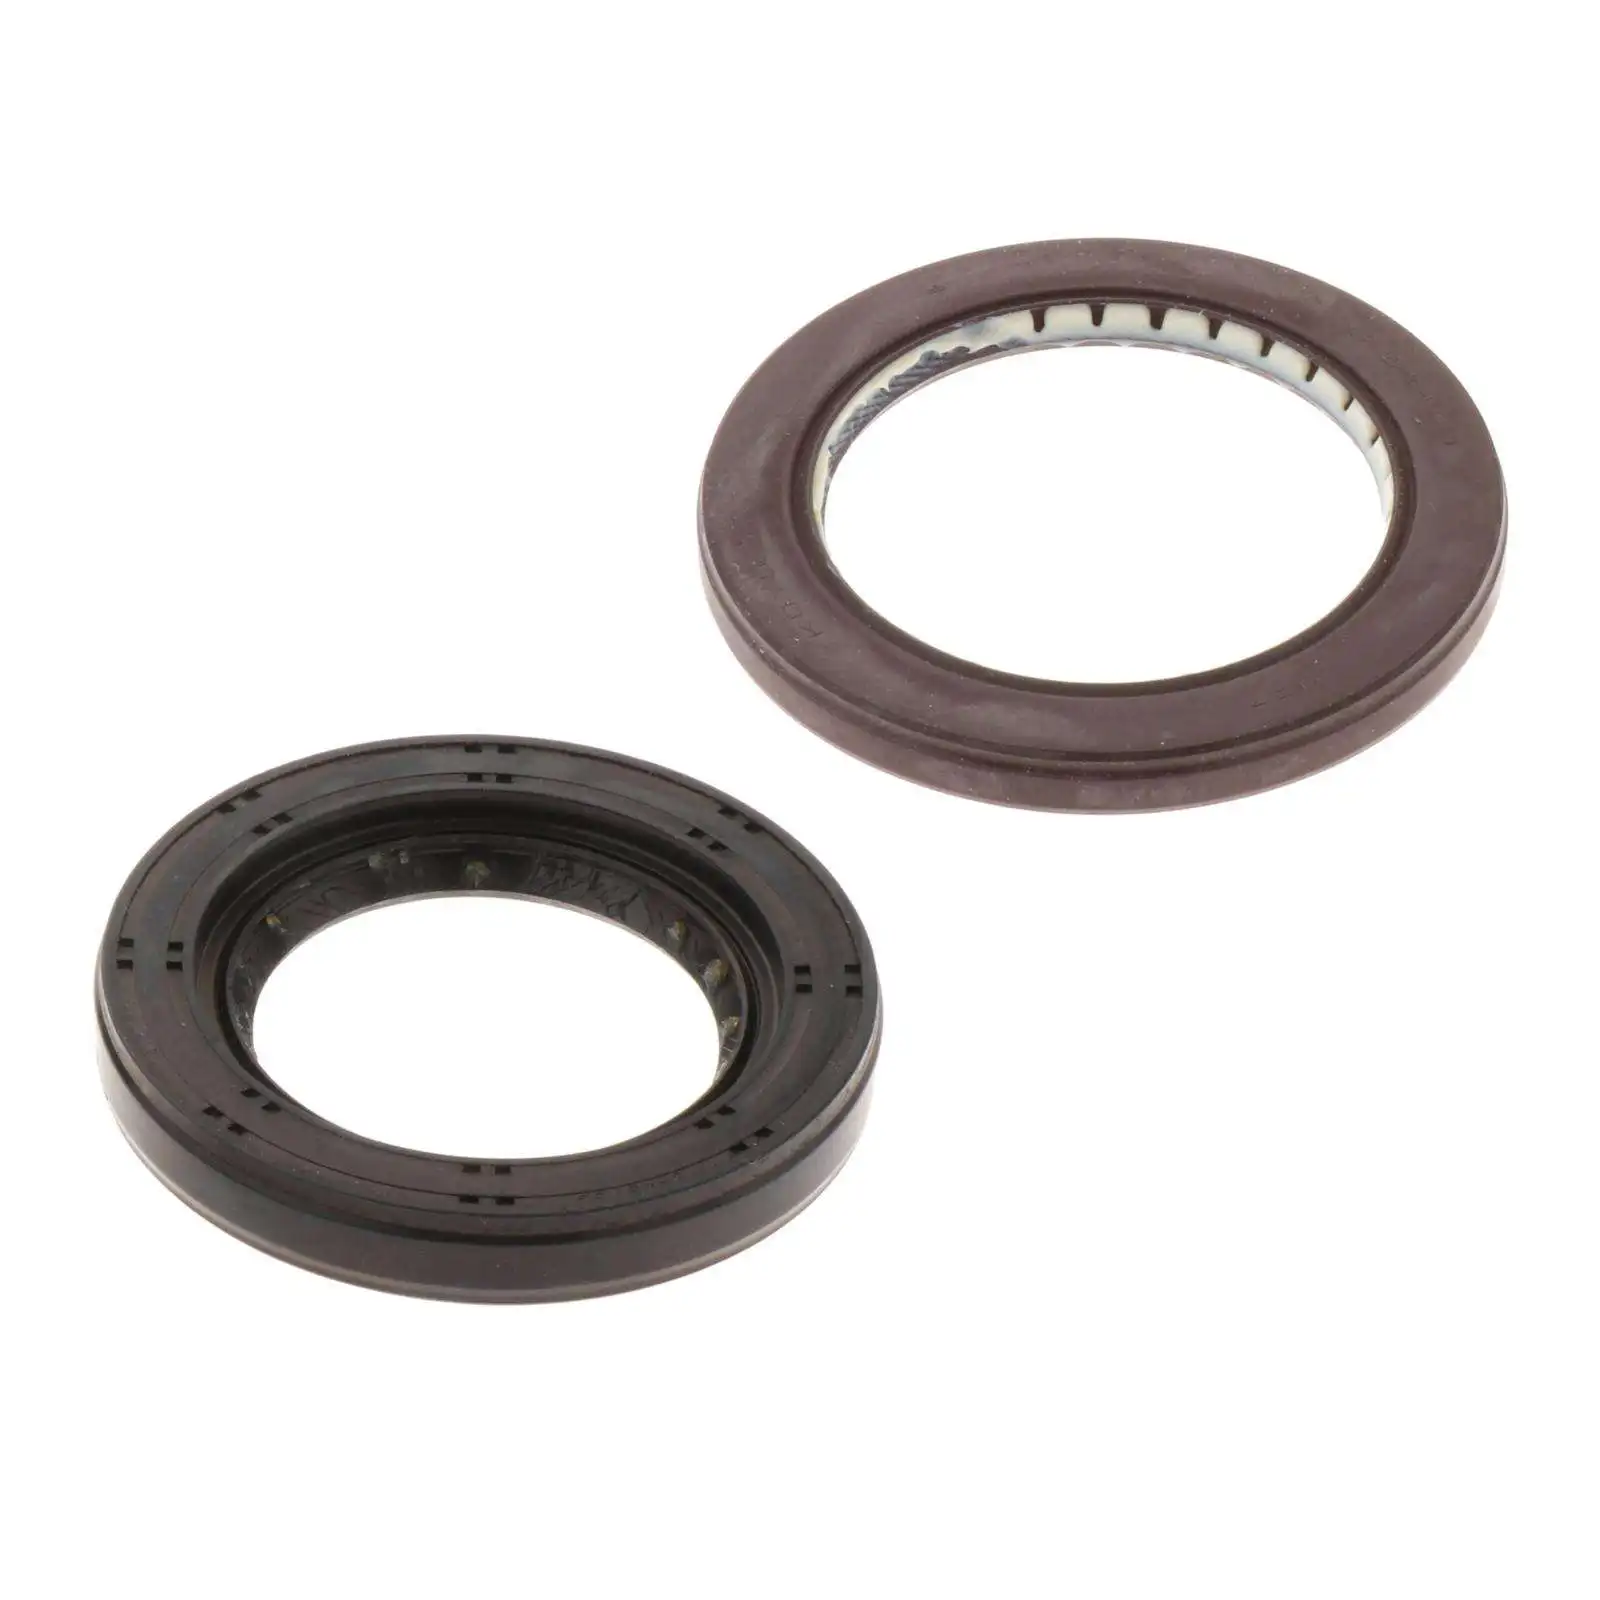 Oil Seal Premium Easy to Install Durable for Skoda Fit for 09G Transmission Accessories High Performance Direct Replaces